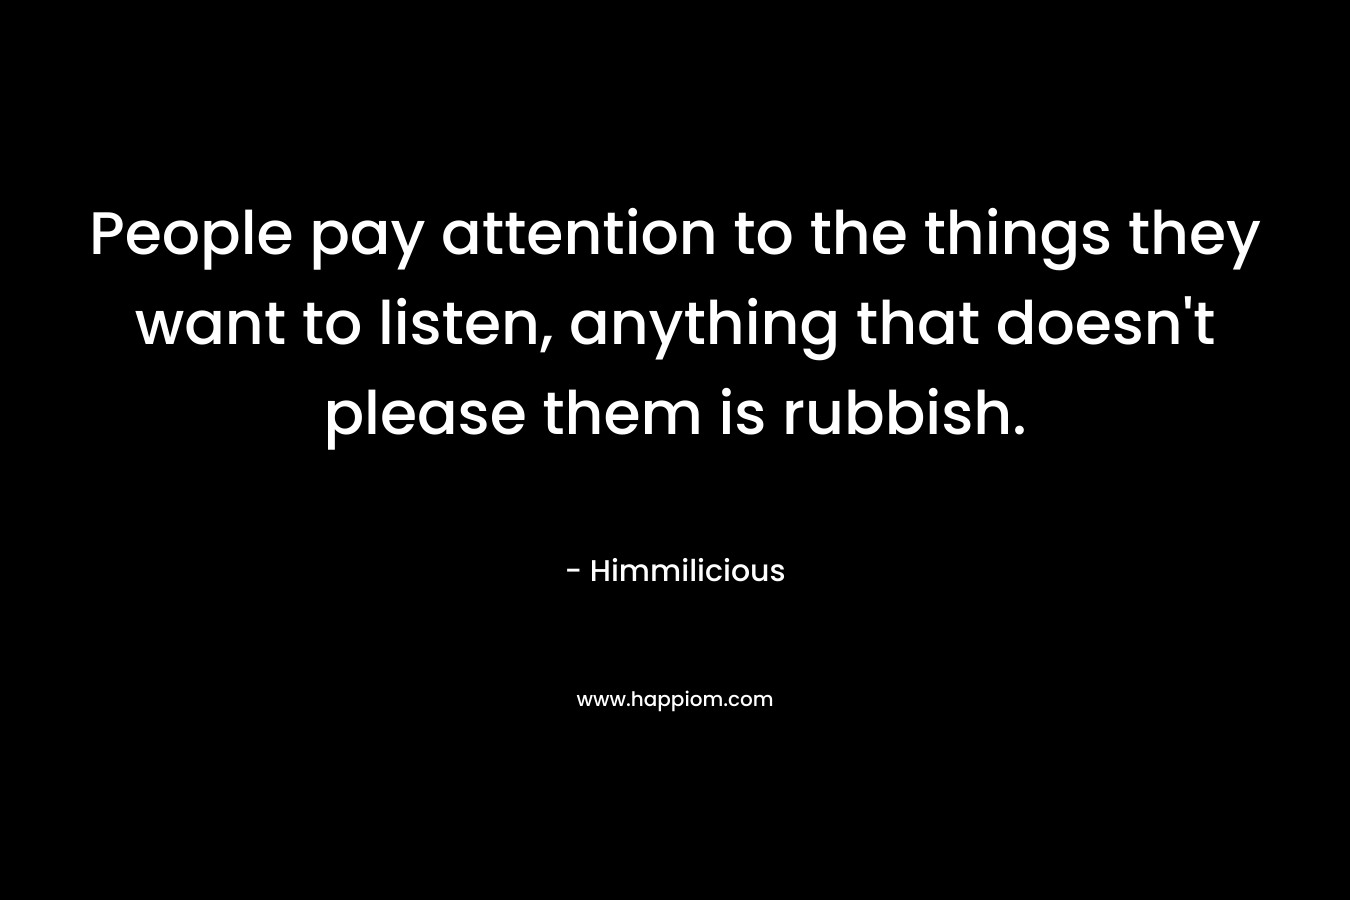 People pay attention to the things they want to listen, anything that doesn't please them is rubbish.